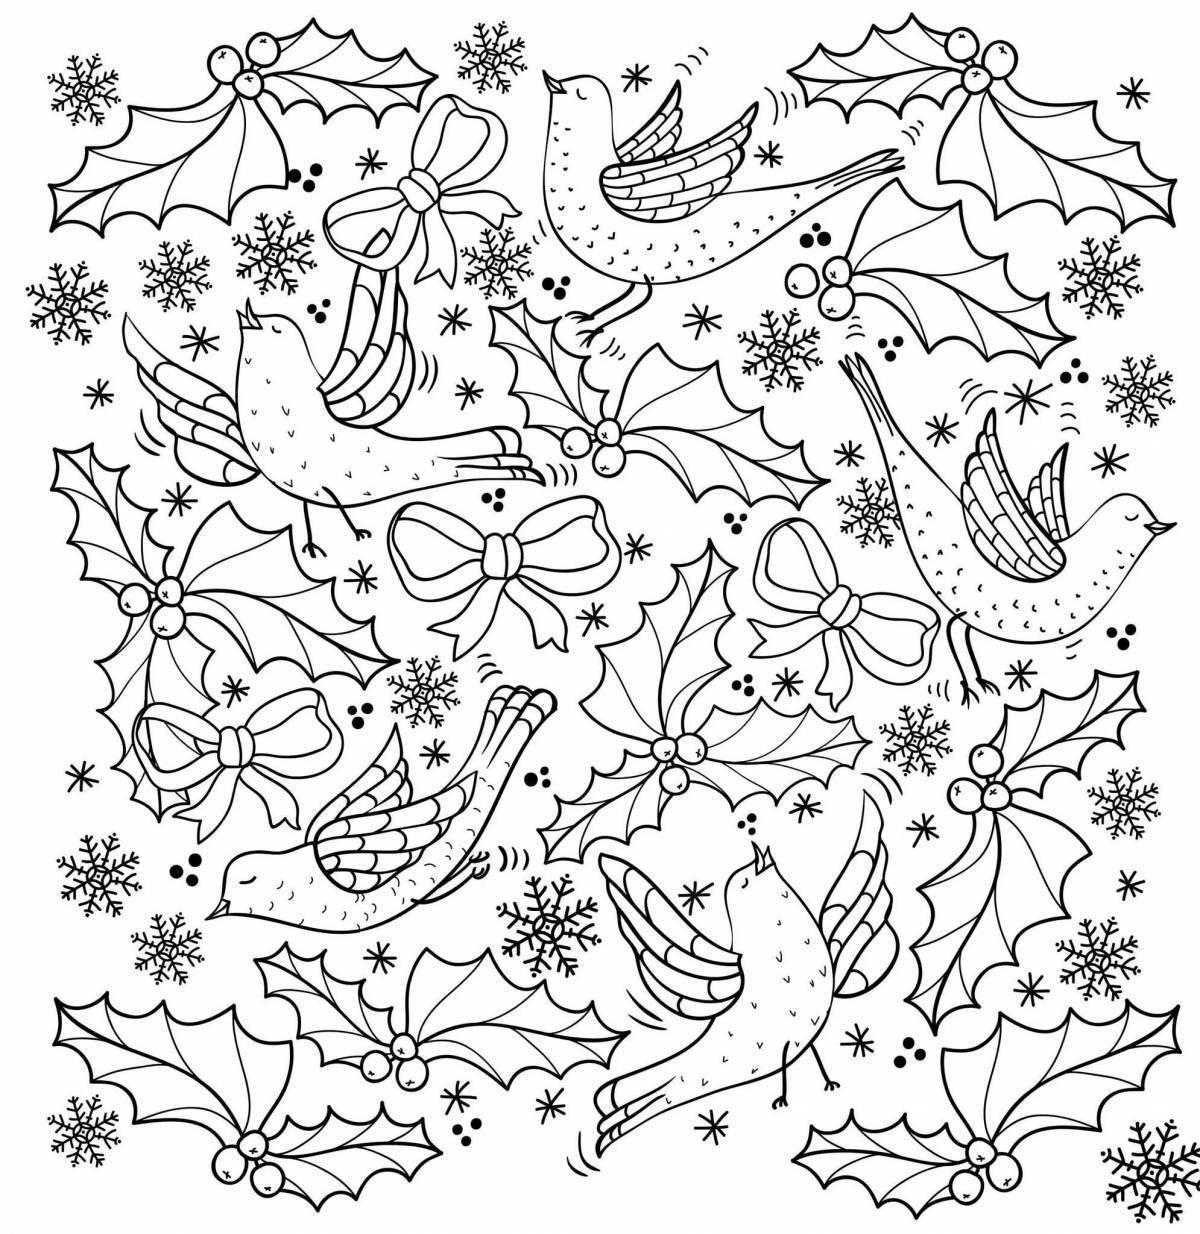 Dazzling Christmas pattern coloring pages